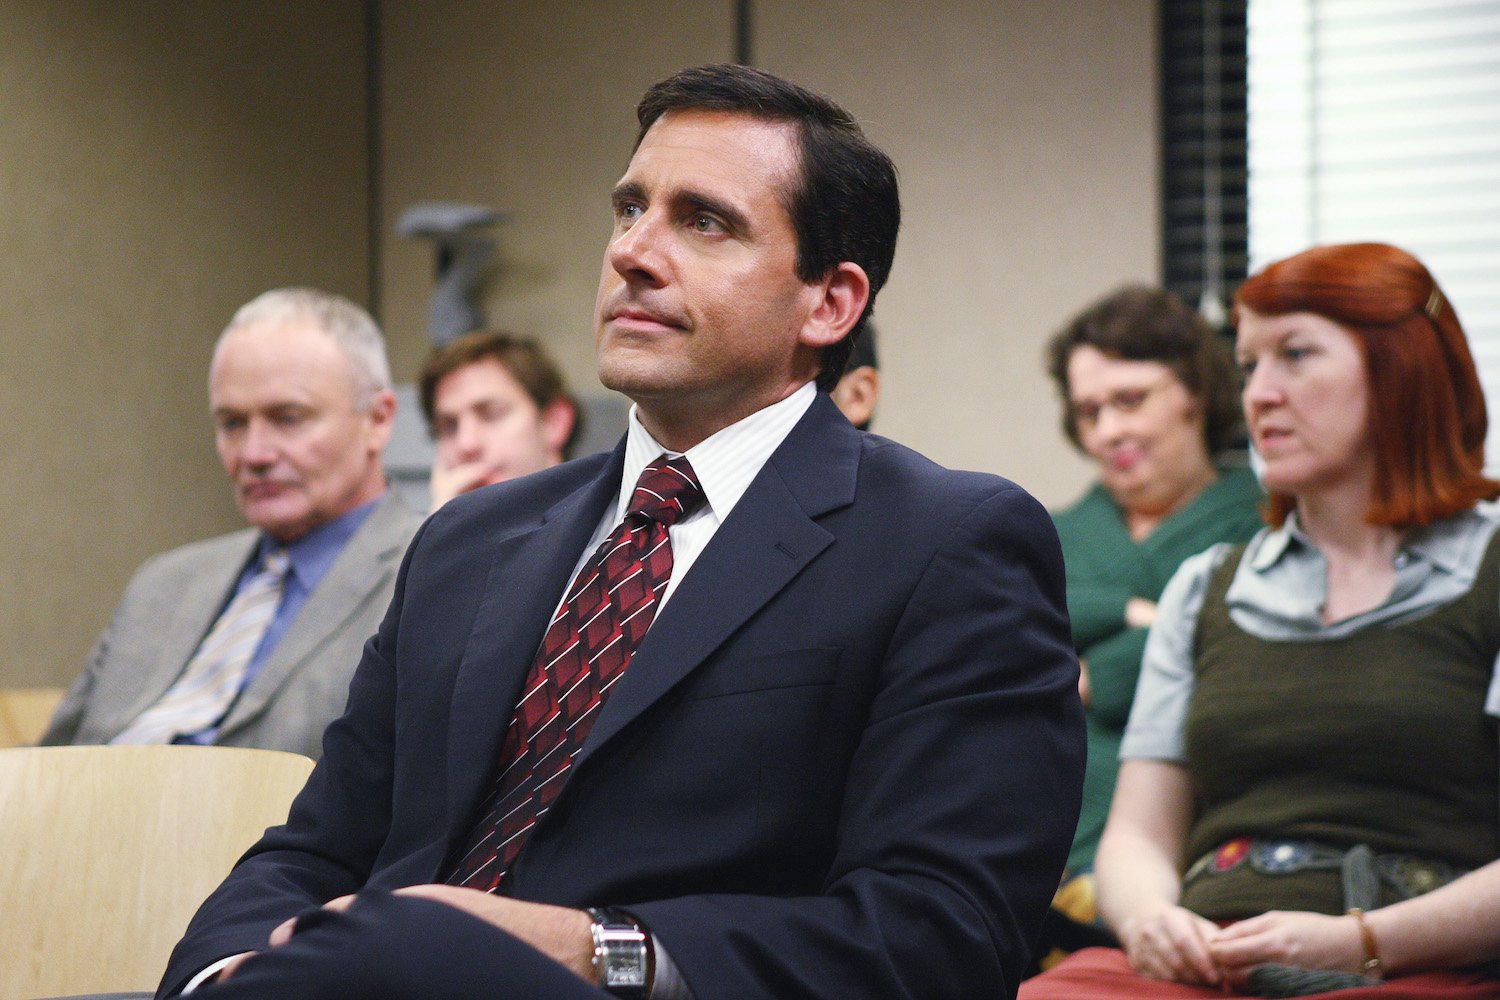 Steve Carell as Michael Scott on 'The Office' in the Dunder Mifflin conference room